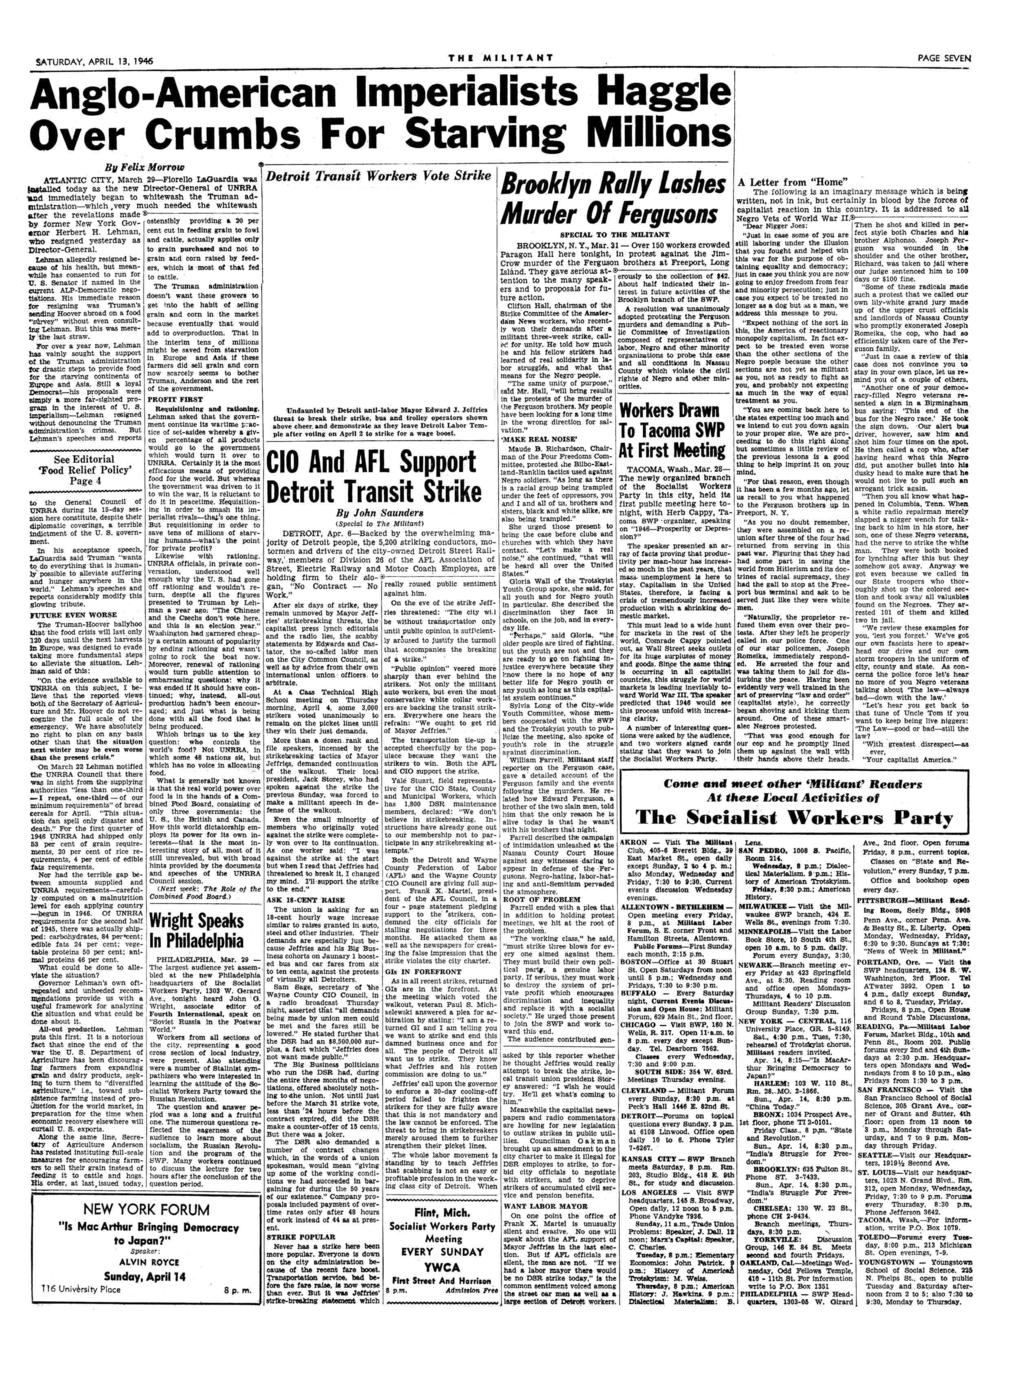 SATURDAY, APRIL 13, 1946 THE M IL IT A N T PAGE SEVEN Anglo-American Imperialists Haggle Over Crumbs For Starving Millions By Felix Morrow ATLANTIC CITY, March 29 Florello LaOuardia was fa»tailed